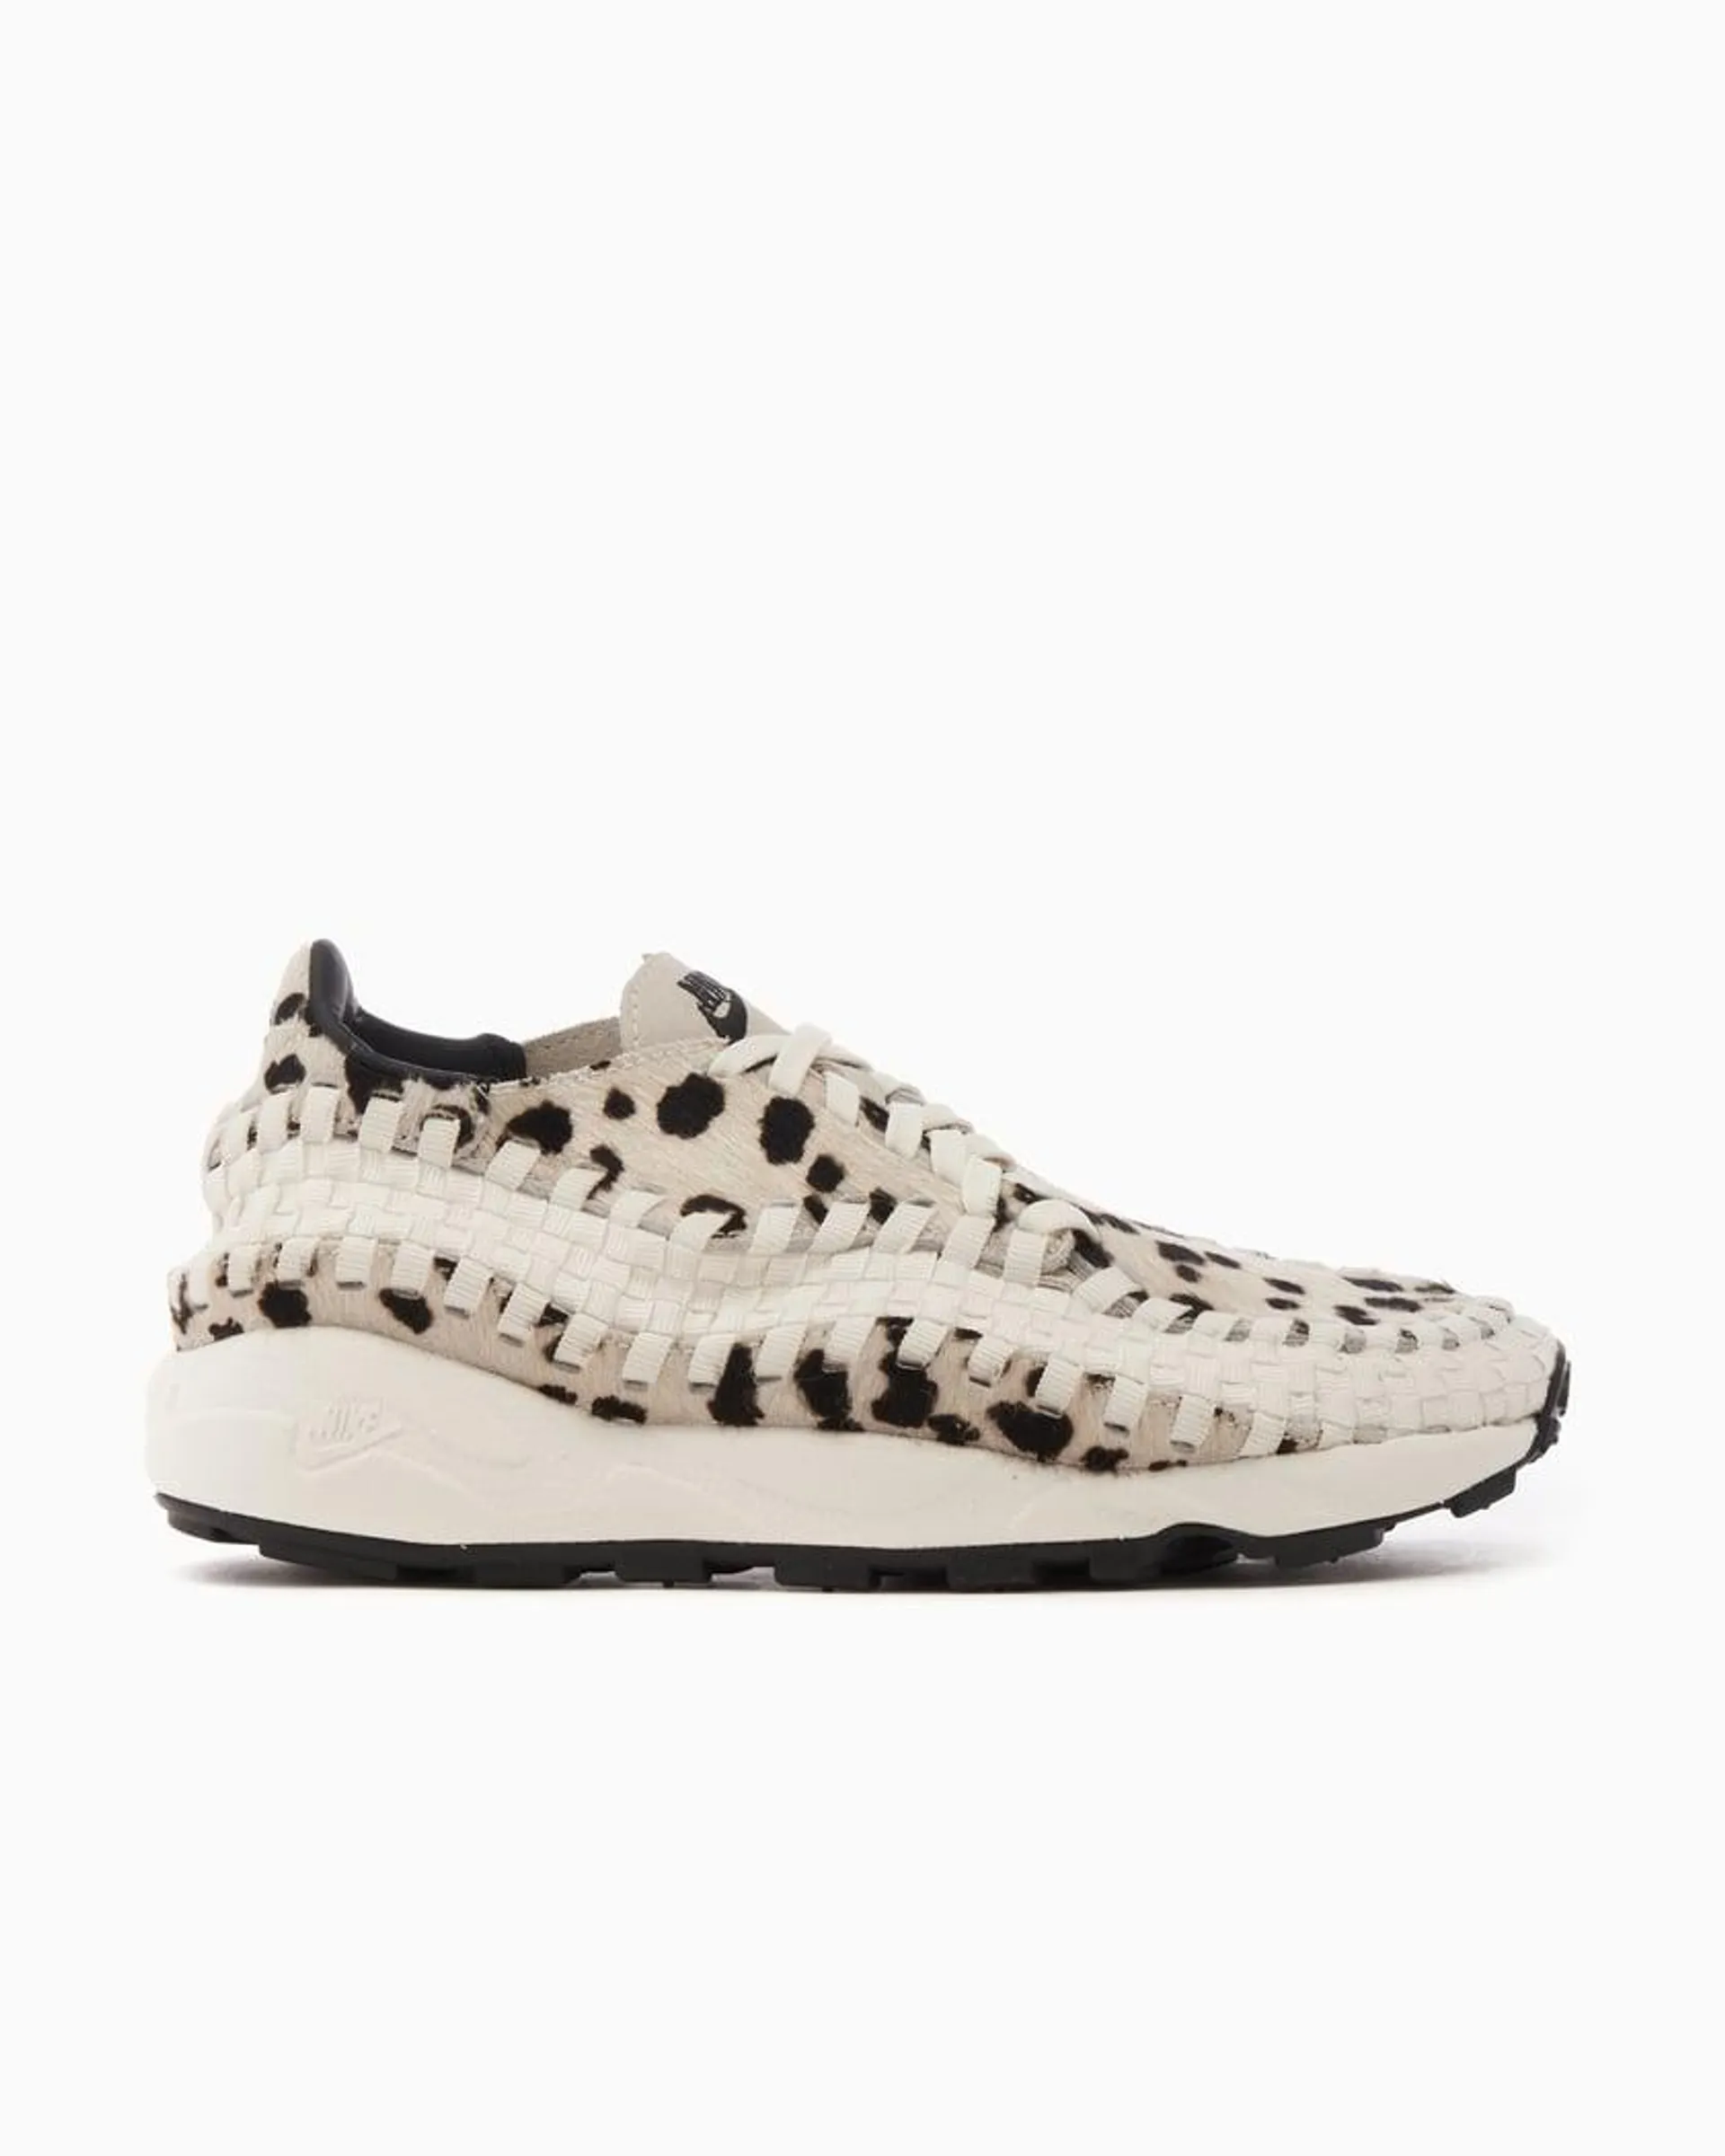 Nike Women's Air Footscape Woven "White Cow"